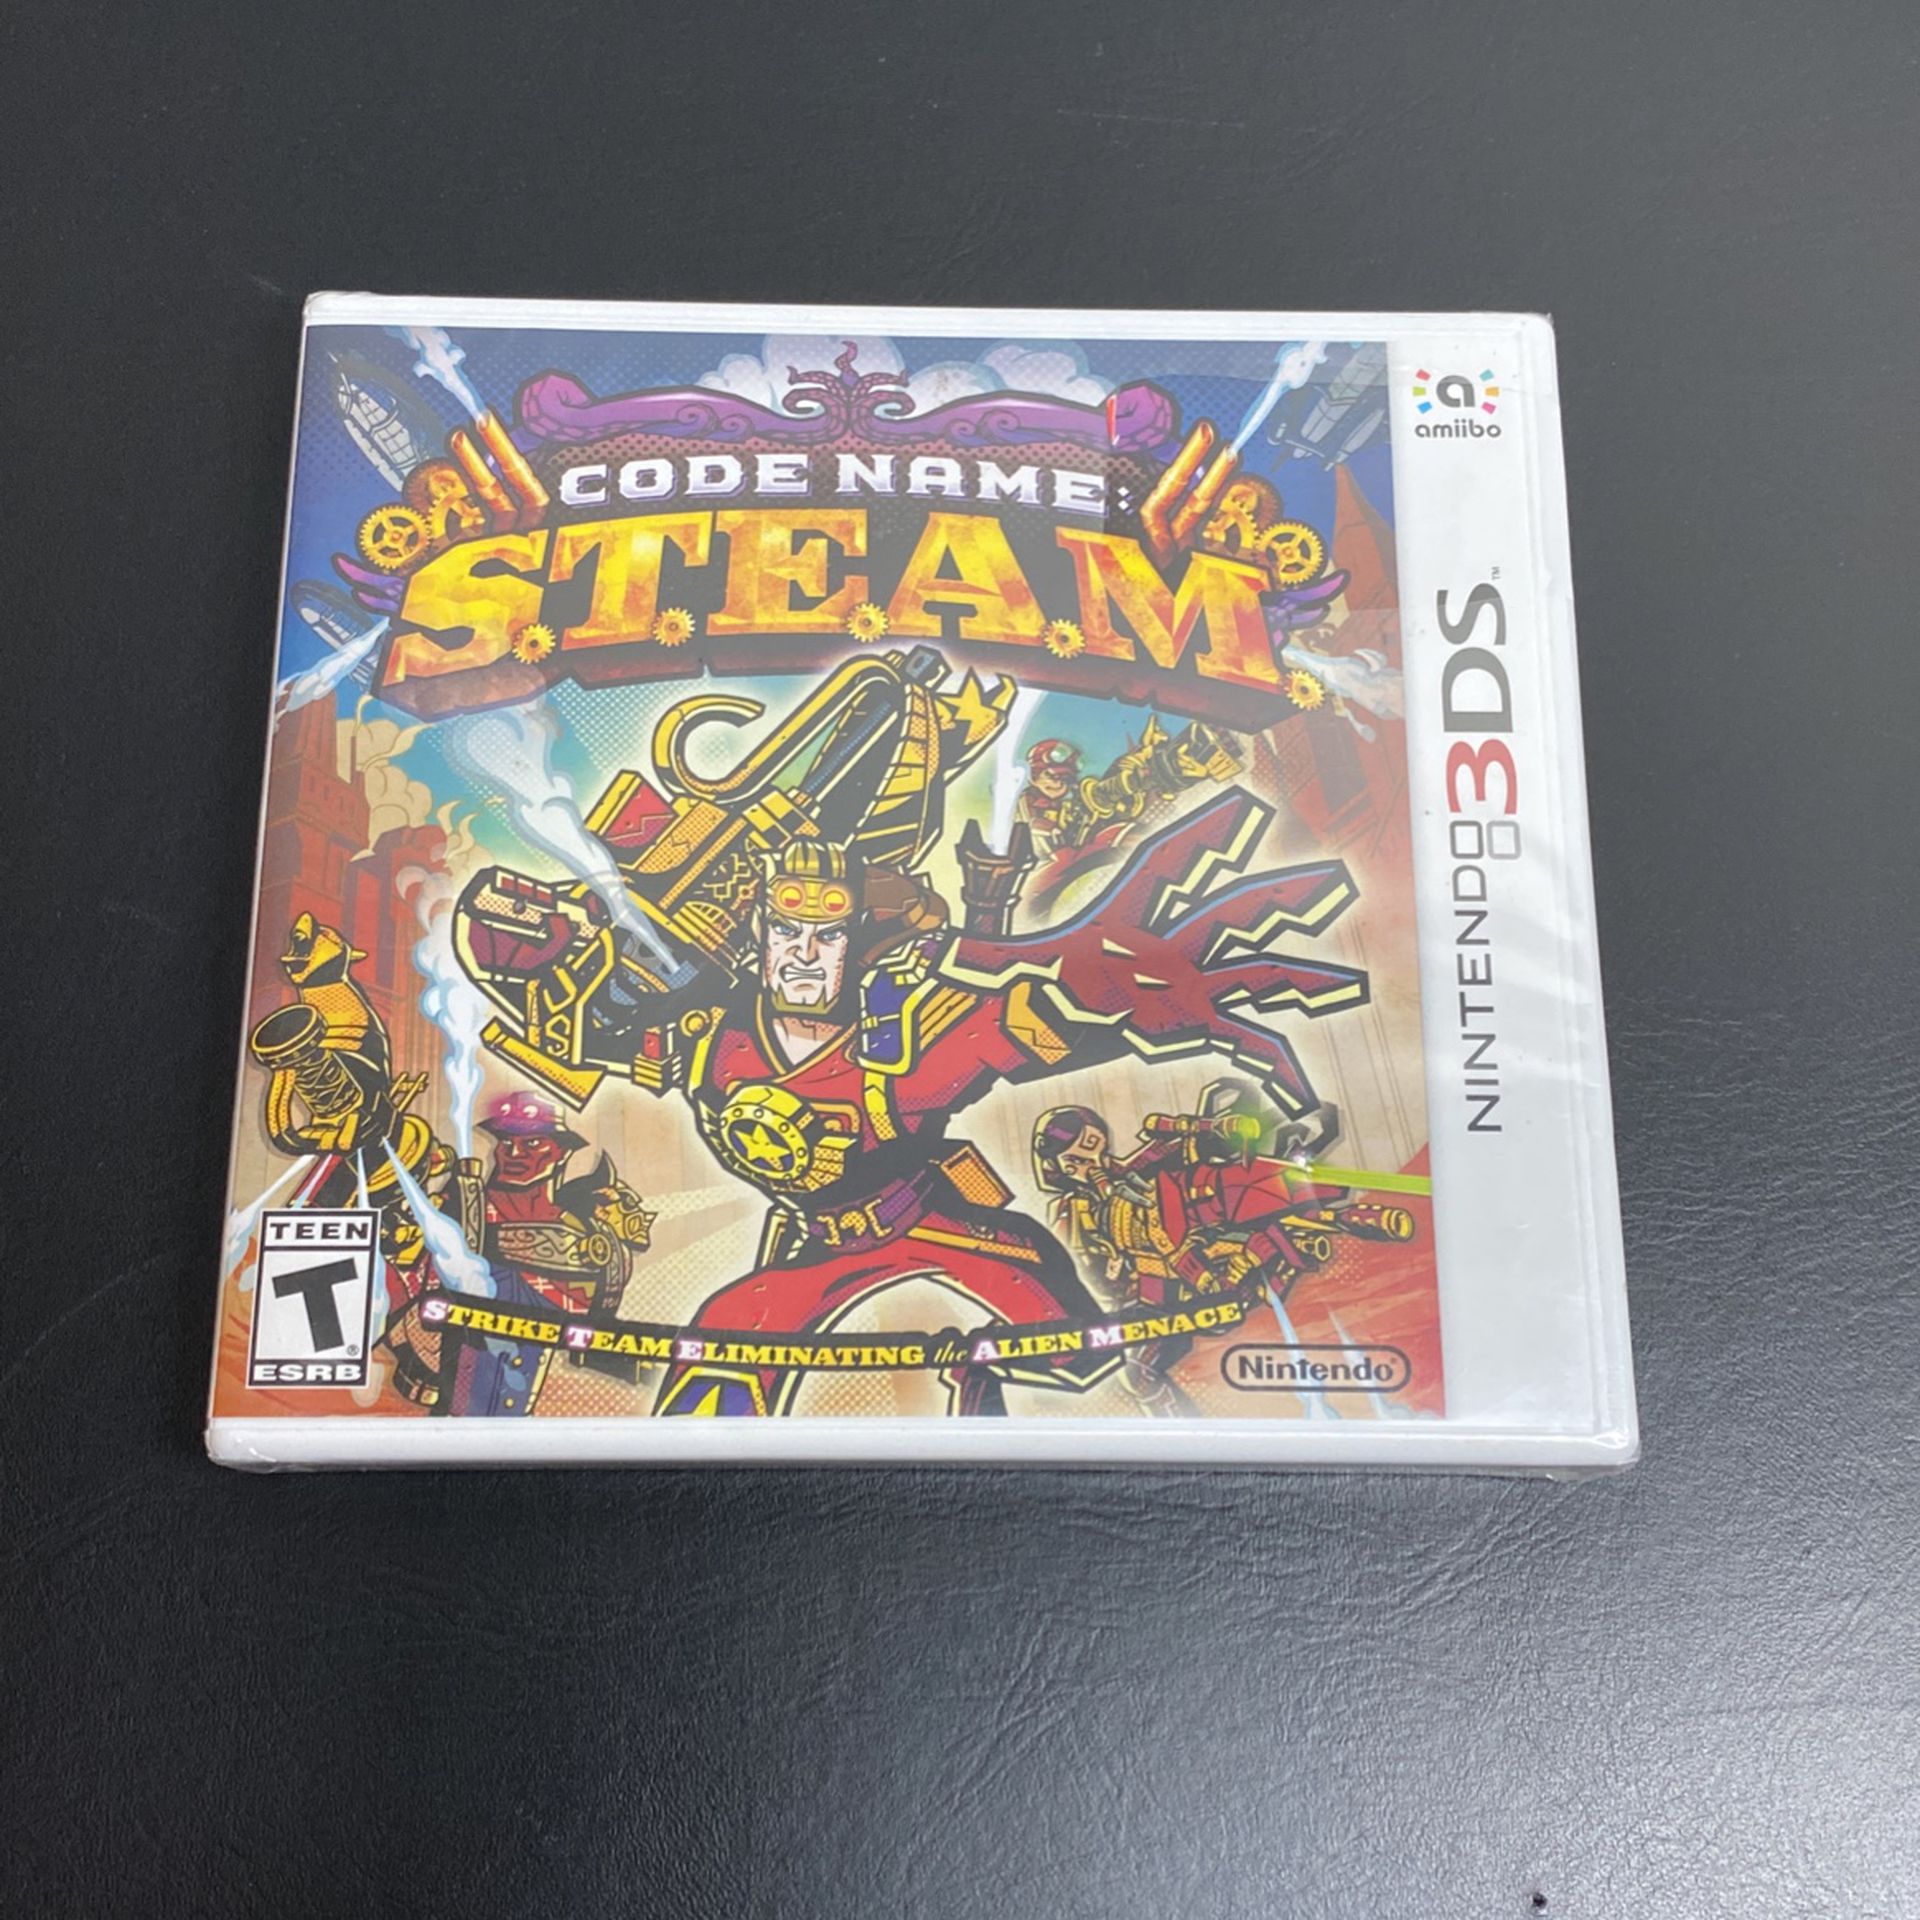 Nintendo 3DS Code Name STEAM Game New